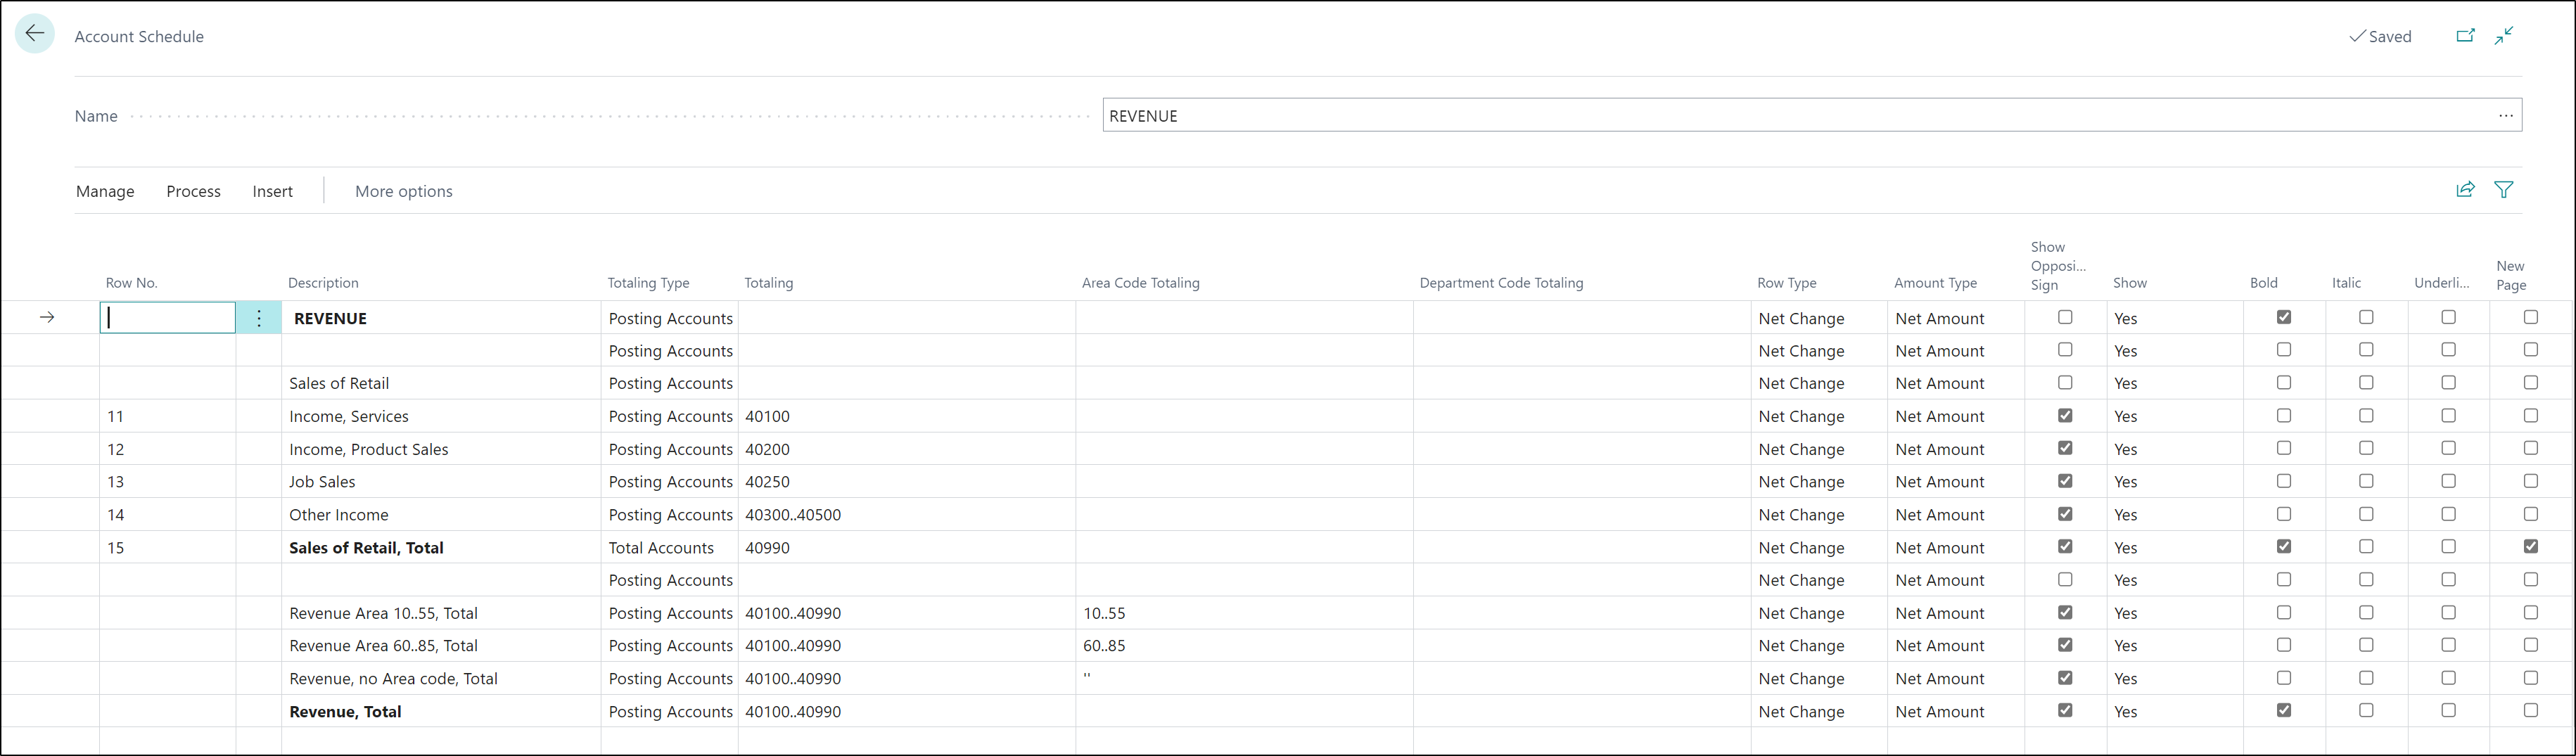 Screenshot of the Account schedule with analysis view dimensions.